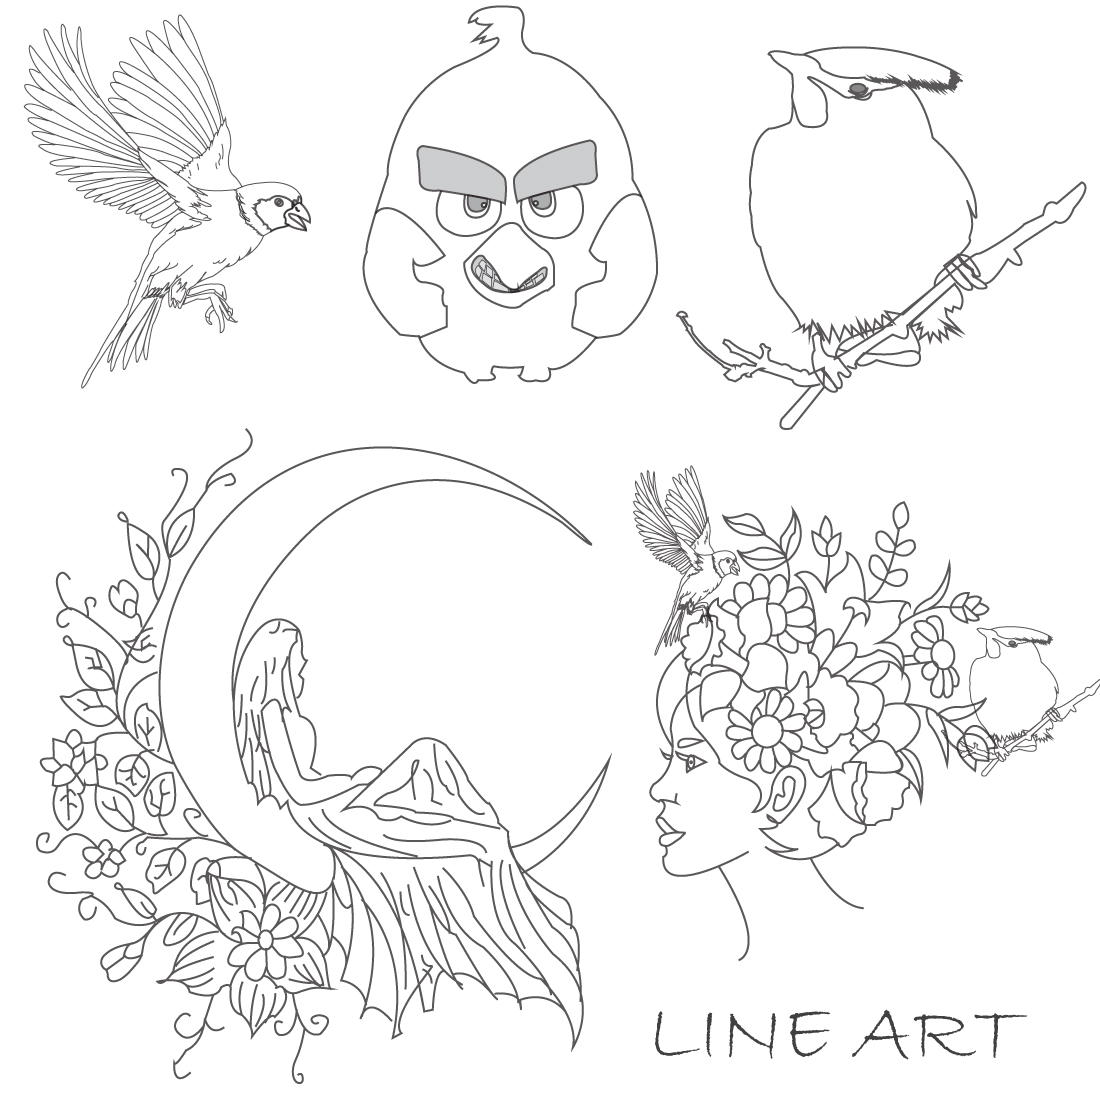 Five-Beautiful-Line Art-High Quality images-only $10 preview image.